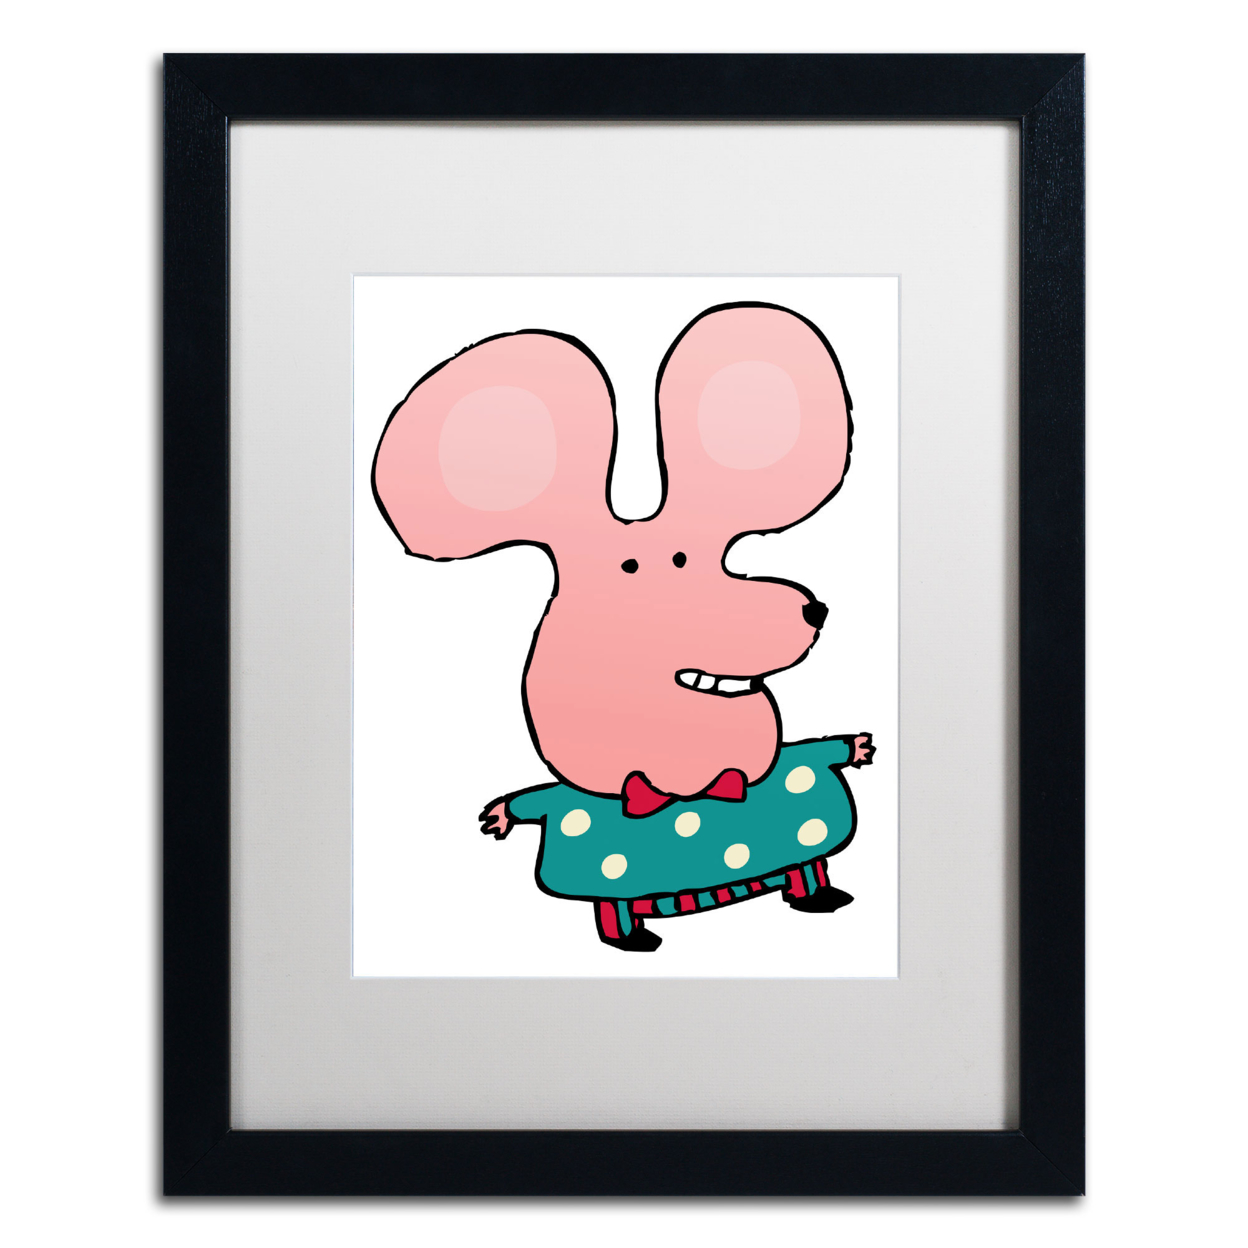 Carla Martell 'Happy Mr.Mouse' Black Wooden Framed Art 18 X 22 Inches